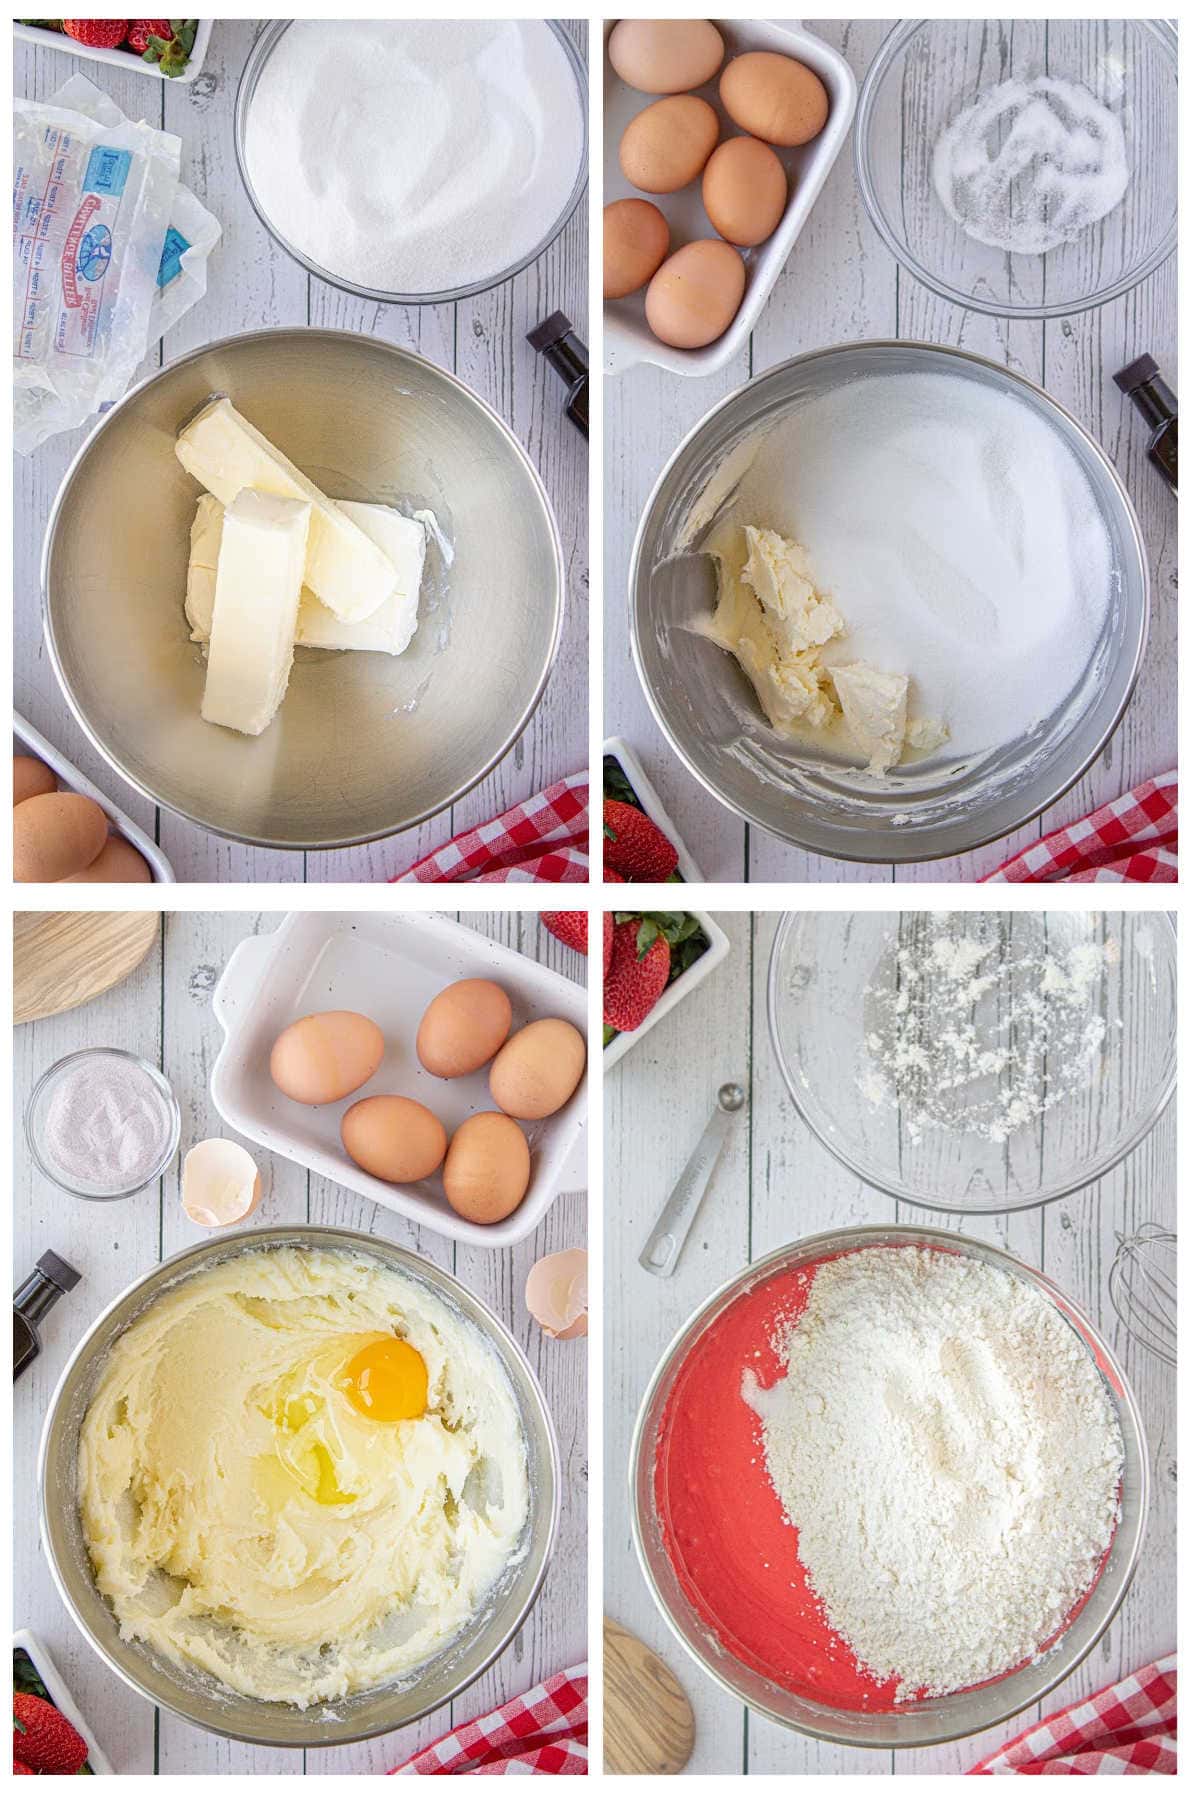 Four images are showing step by step instructions on how to make a strawberry bundt cake.